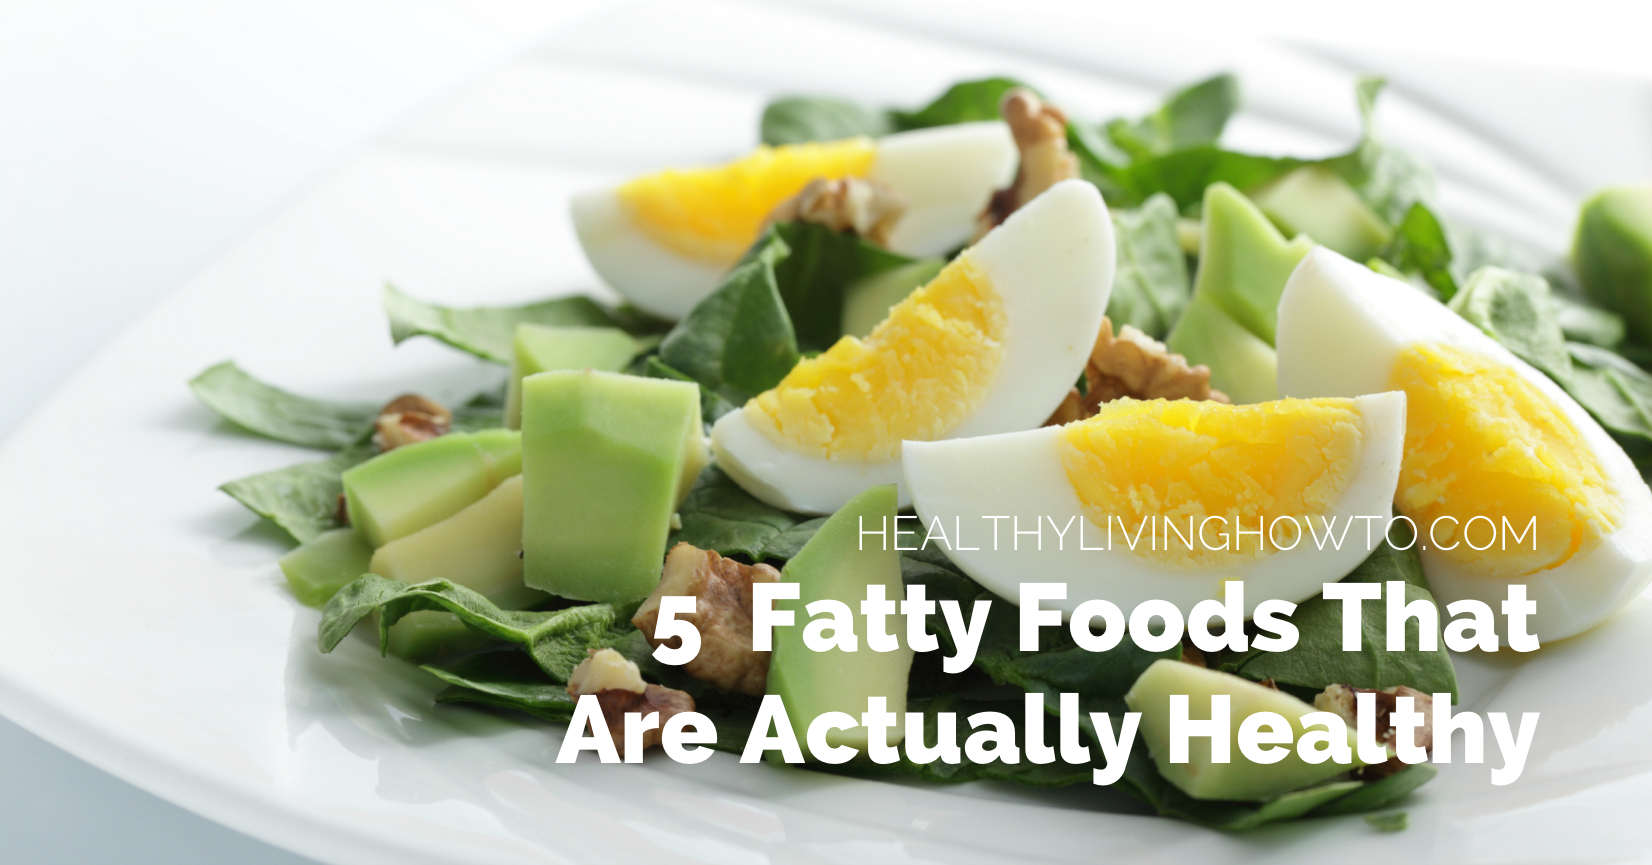 5 Fatty Foods That Are Actually Healthy